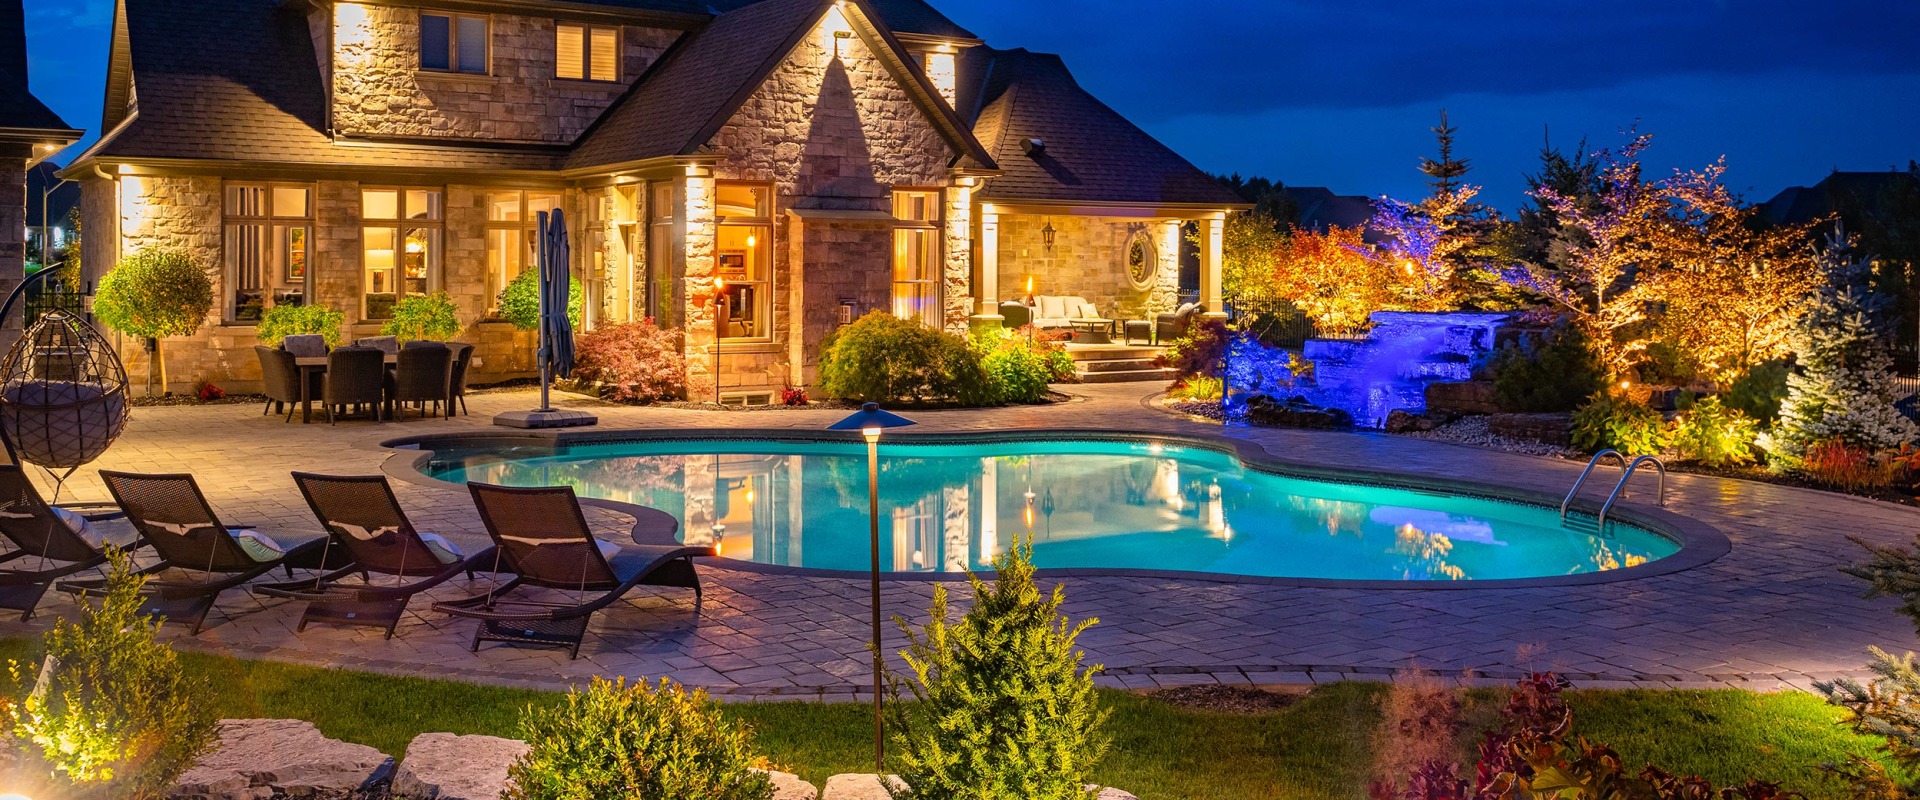 Outdoor Lighting Options to Enhance Your Home's Curb Appeal